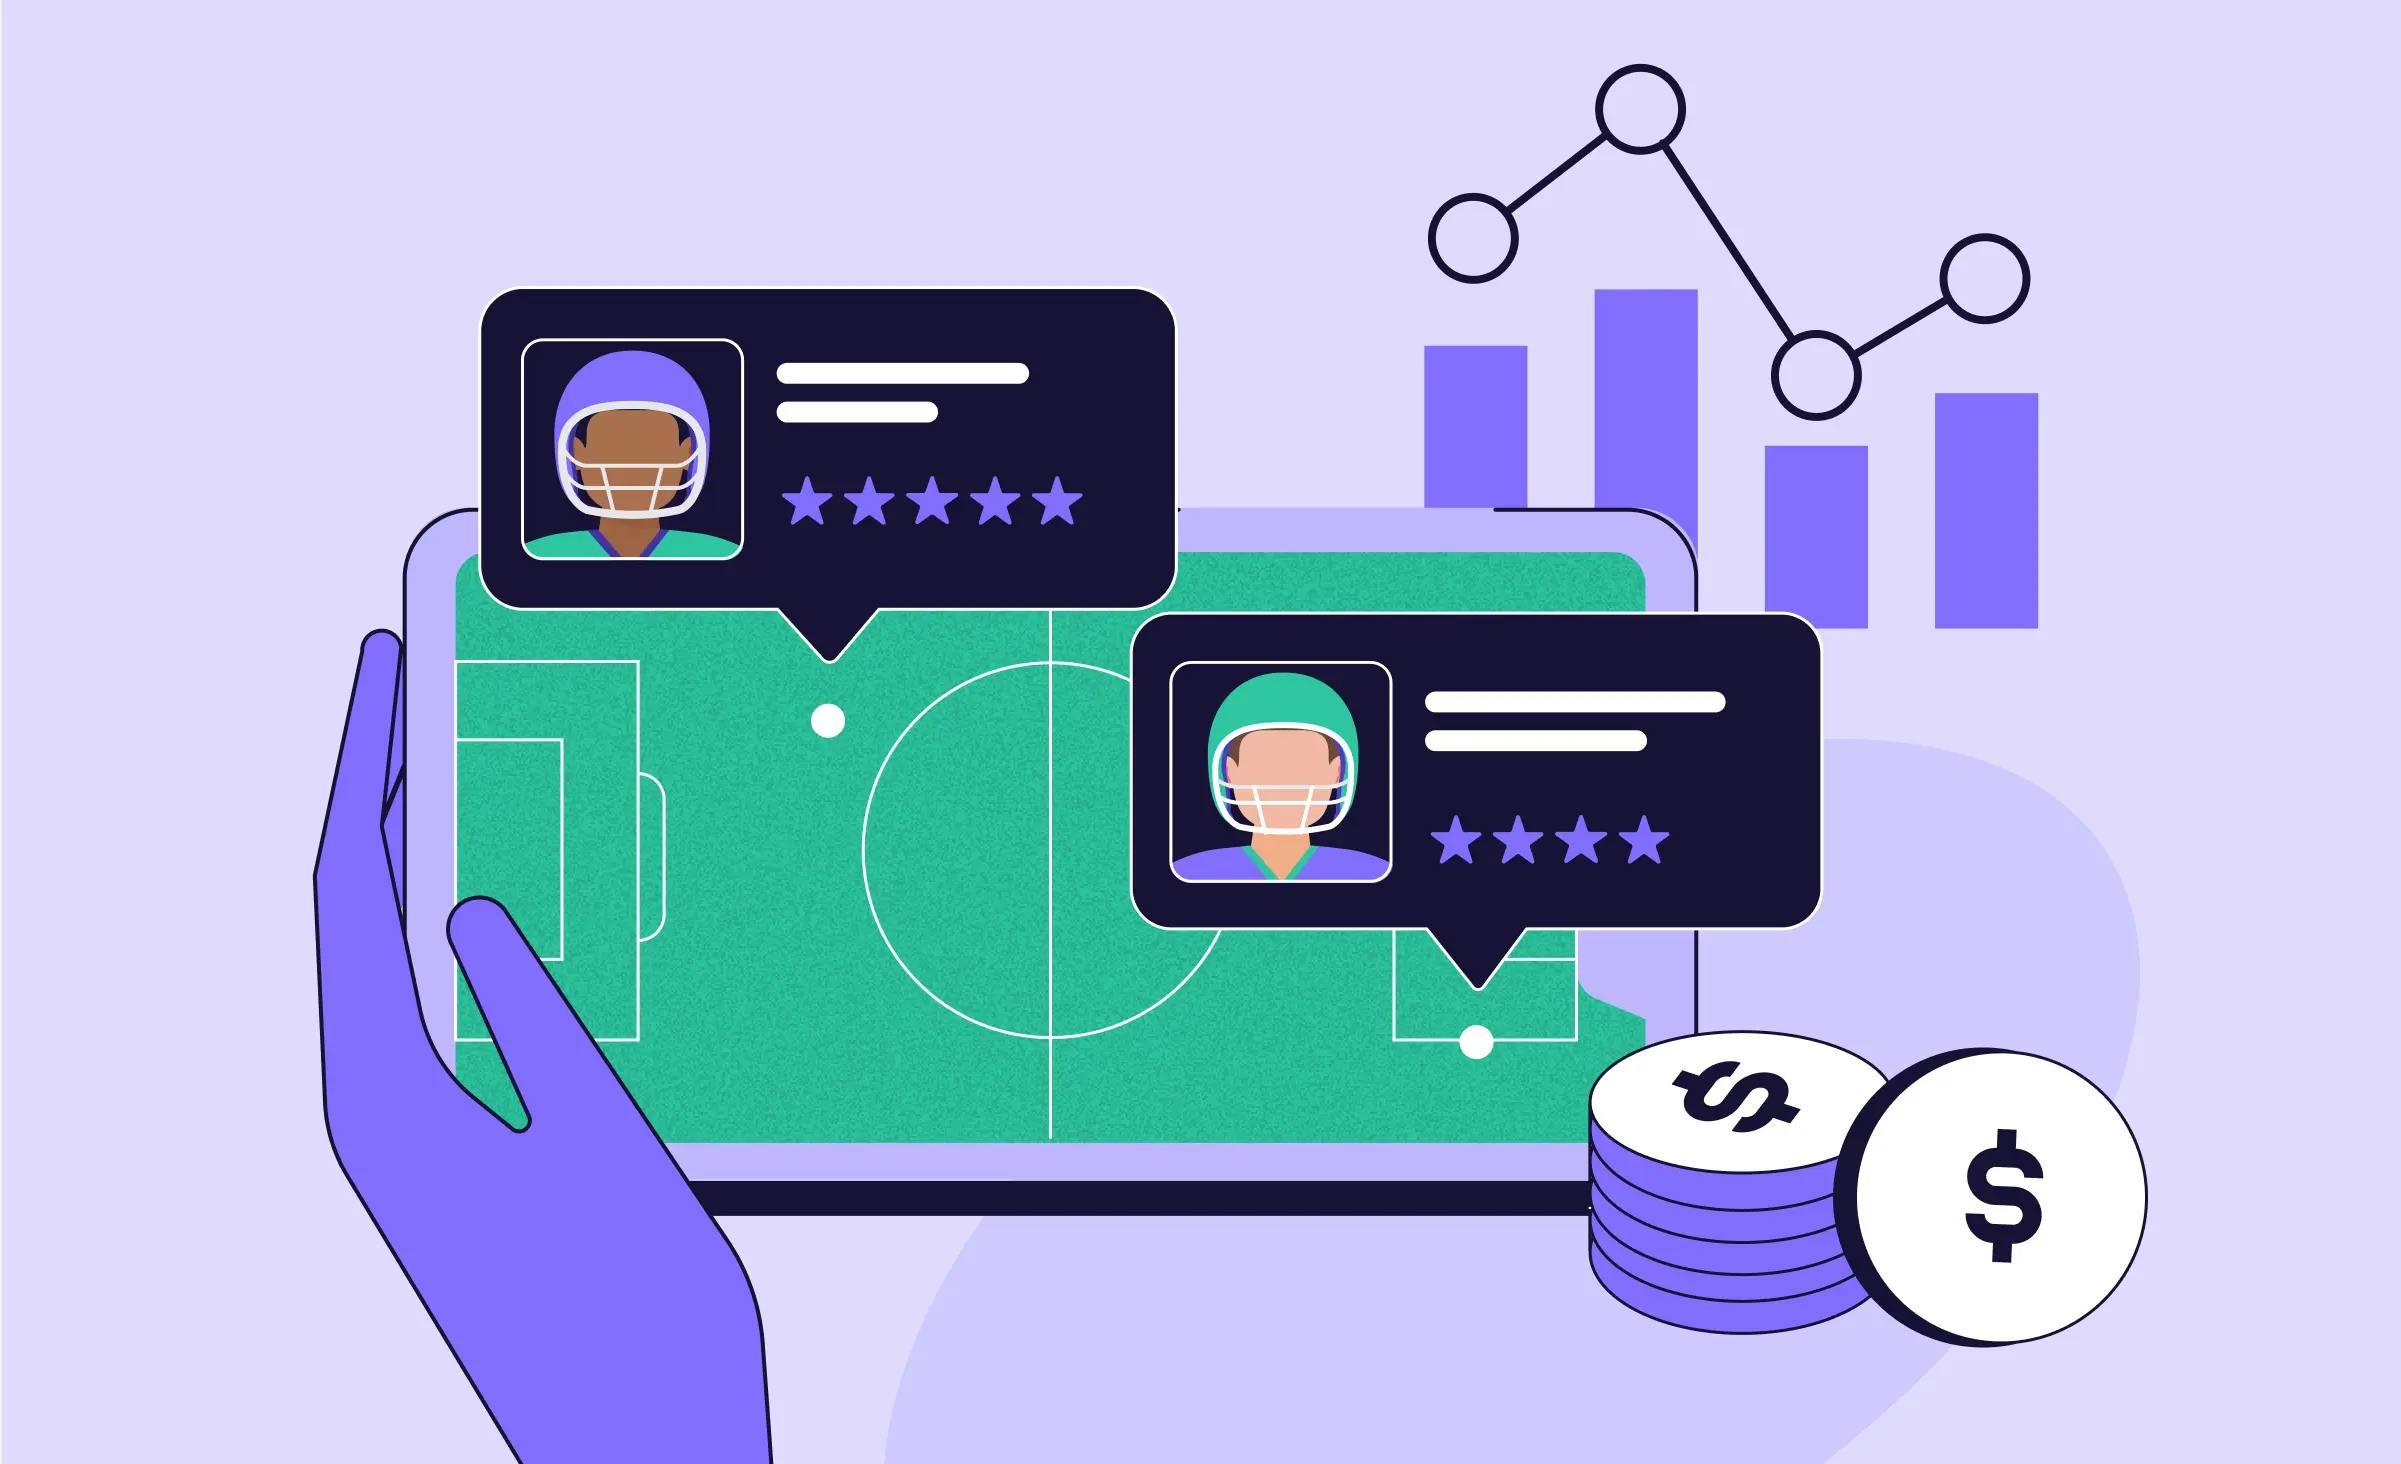 A guide for fantasy sports app development with key features and technologies to build a fantasy sports app